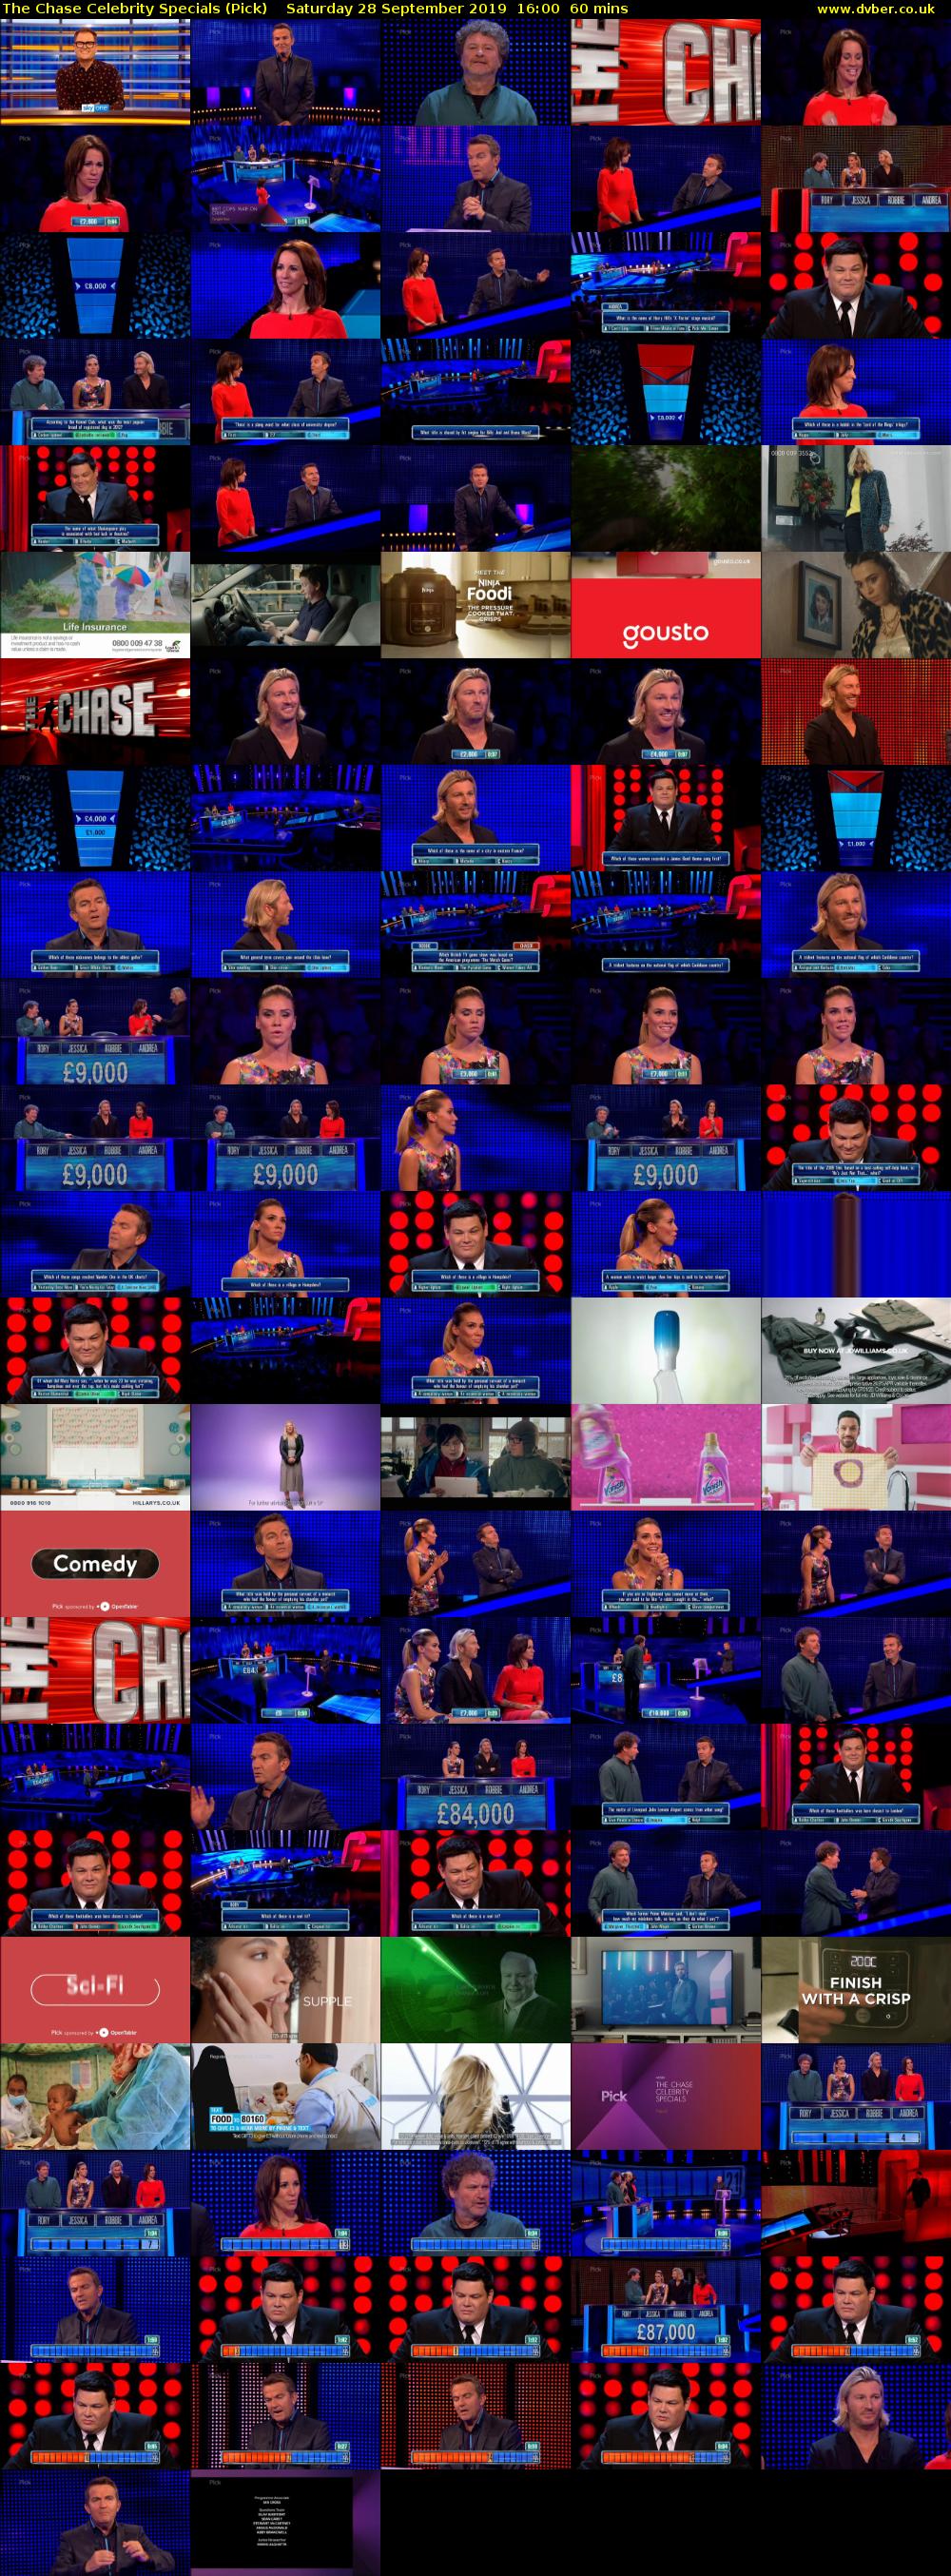 The Chase Celebrity Specials (Pick) Saturday 28 September 2019 16:00 - 17:00